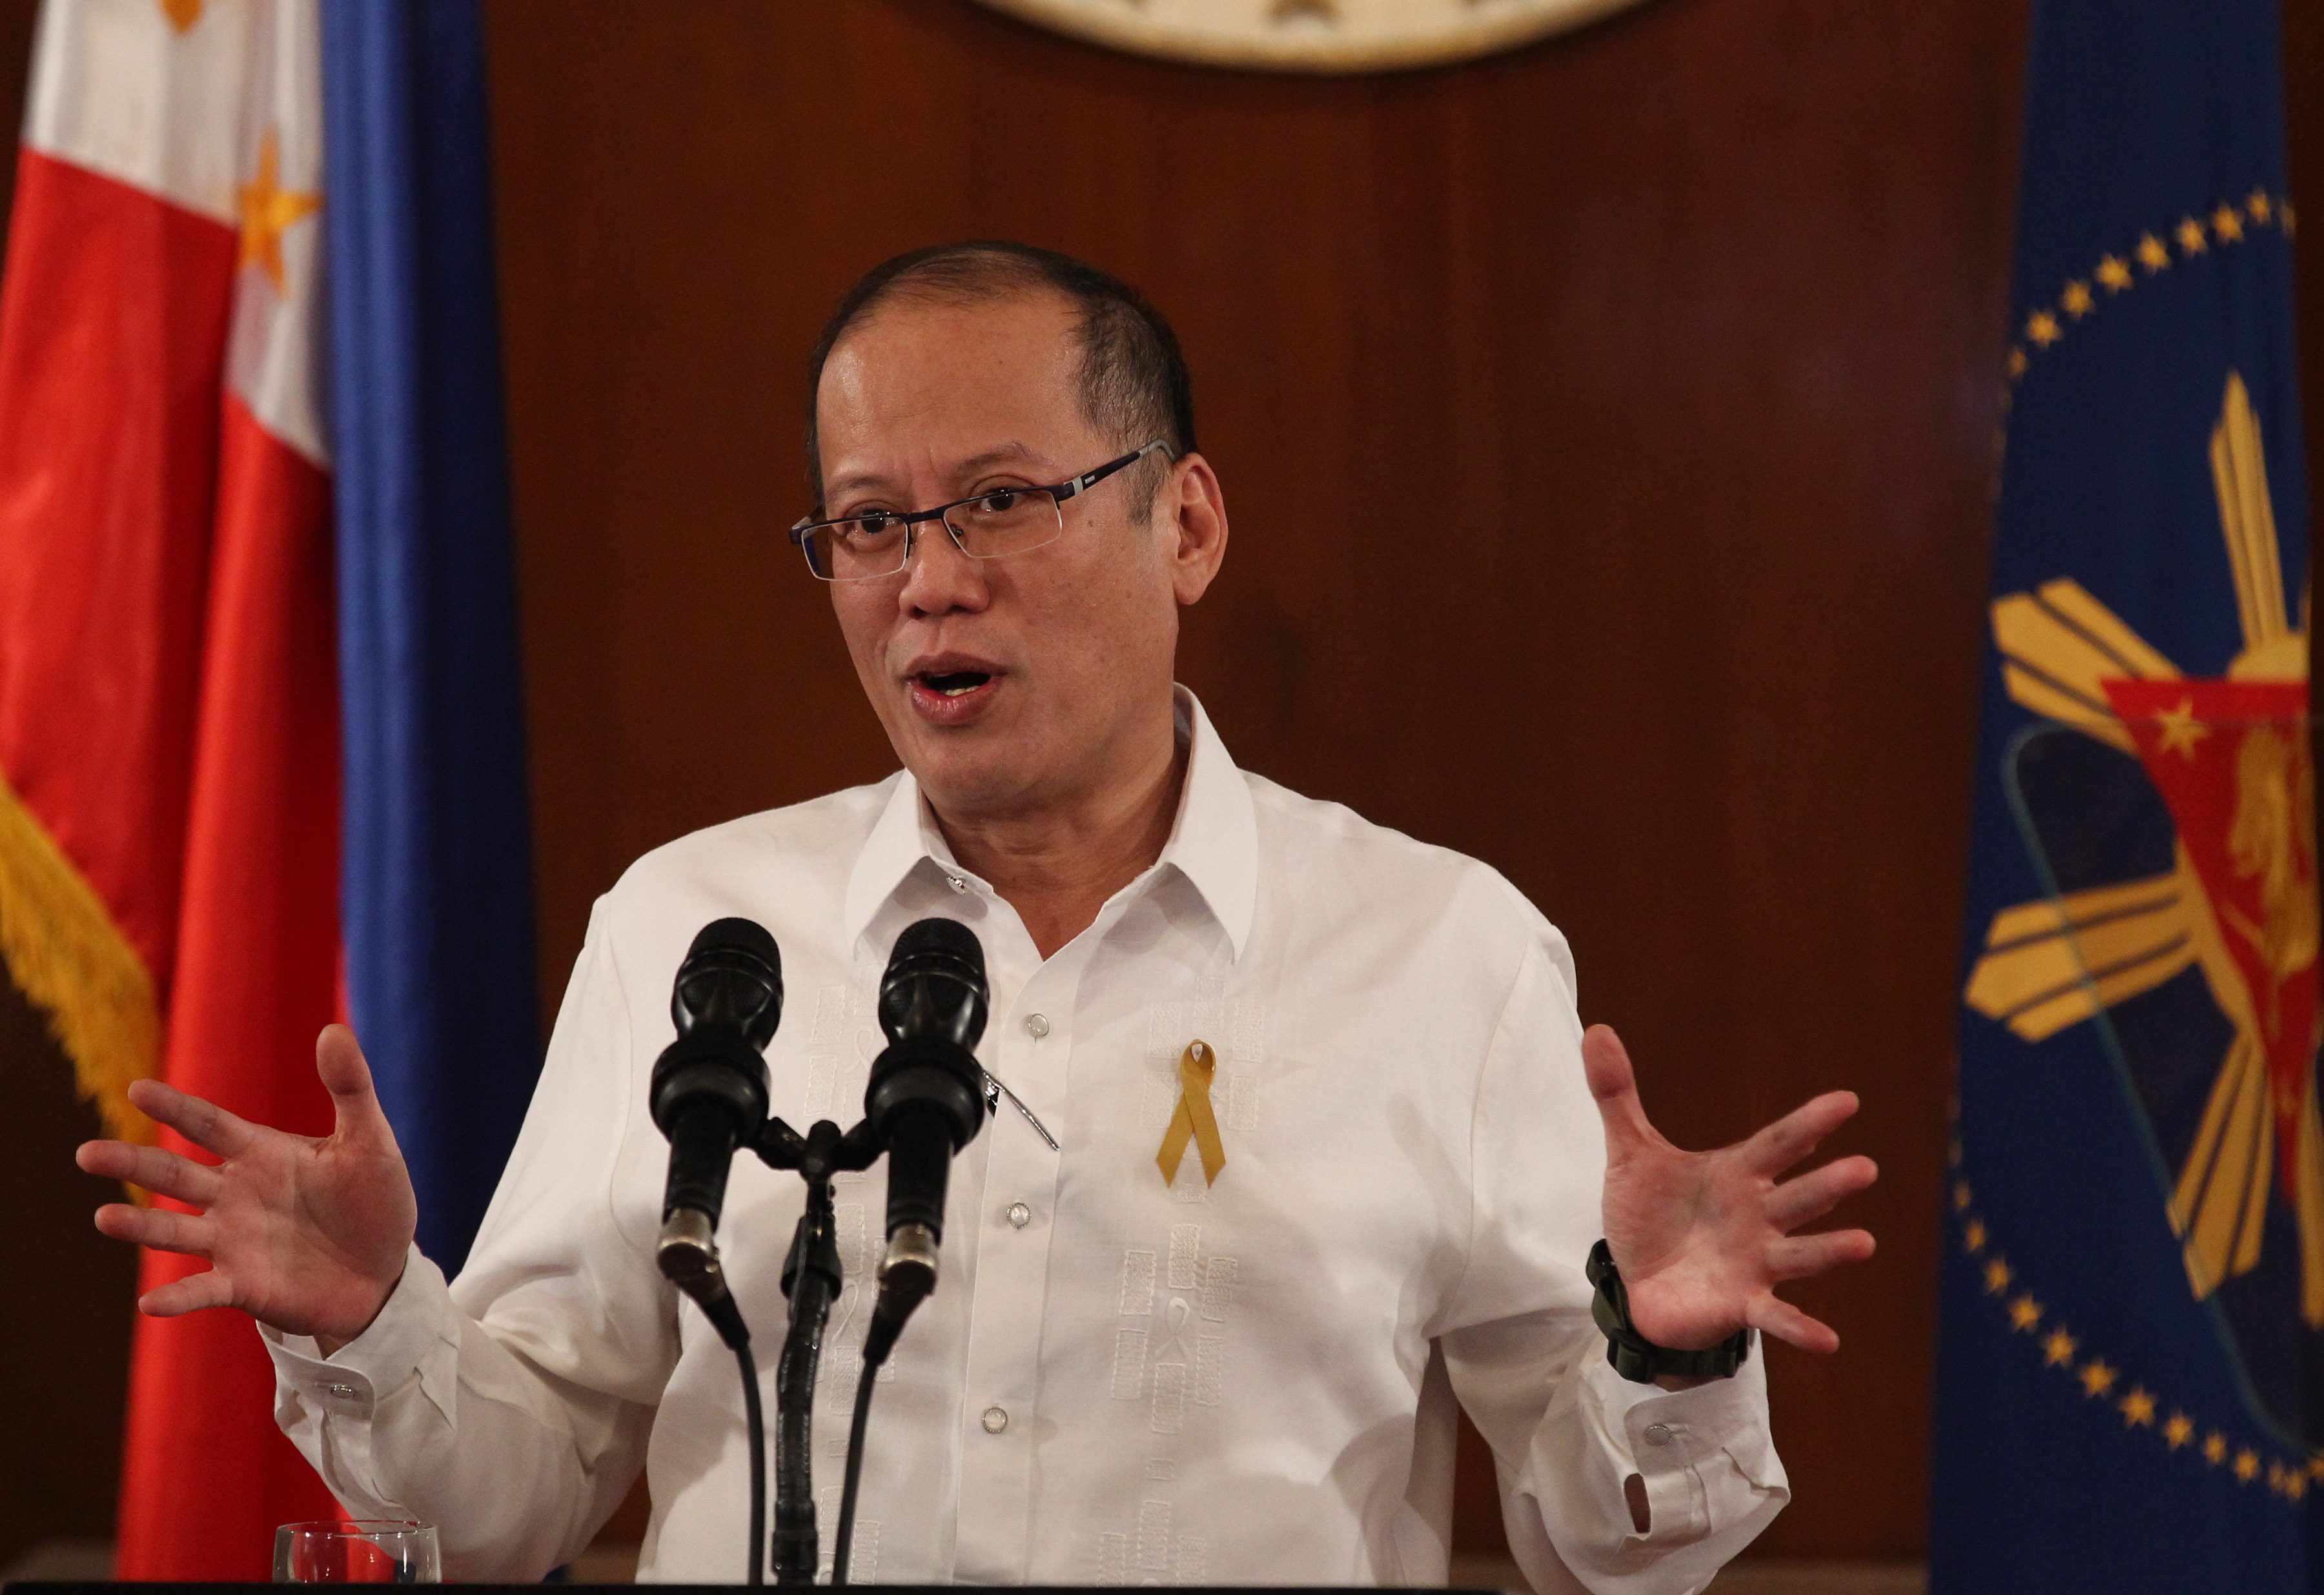 President Benigno Aquino III declared the National day of Mourning for the PNP Special Action Forces that was killed in Mamasapano, Maguindanao during his message held at the President hall in Malacanang.(Photo By Ryan Lim/Malacanang Photo Bureau) 